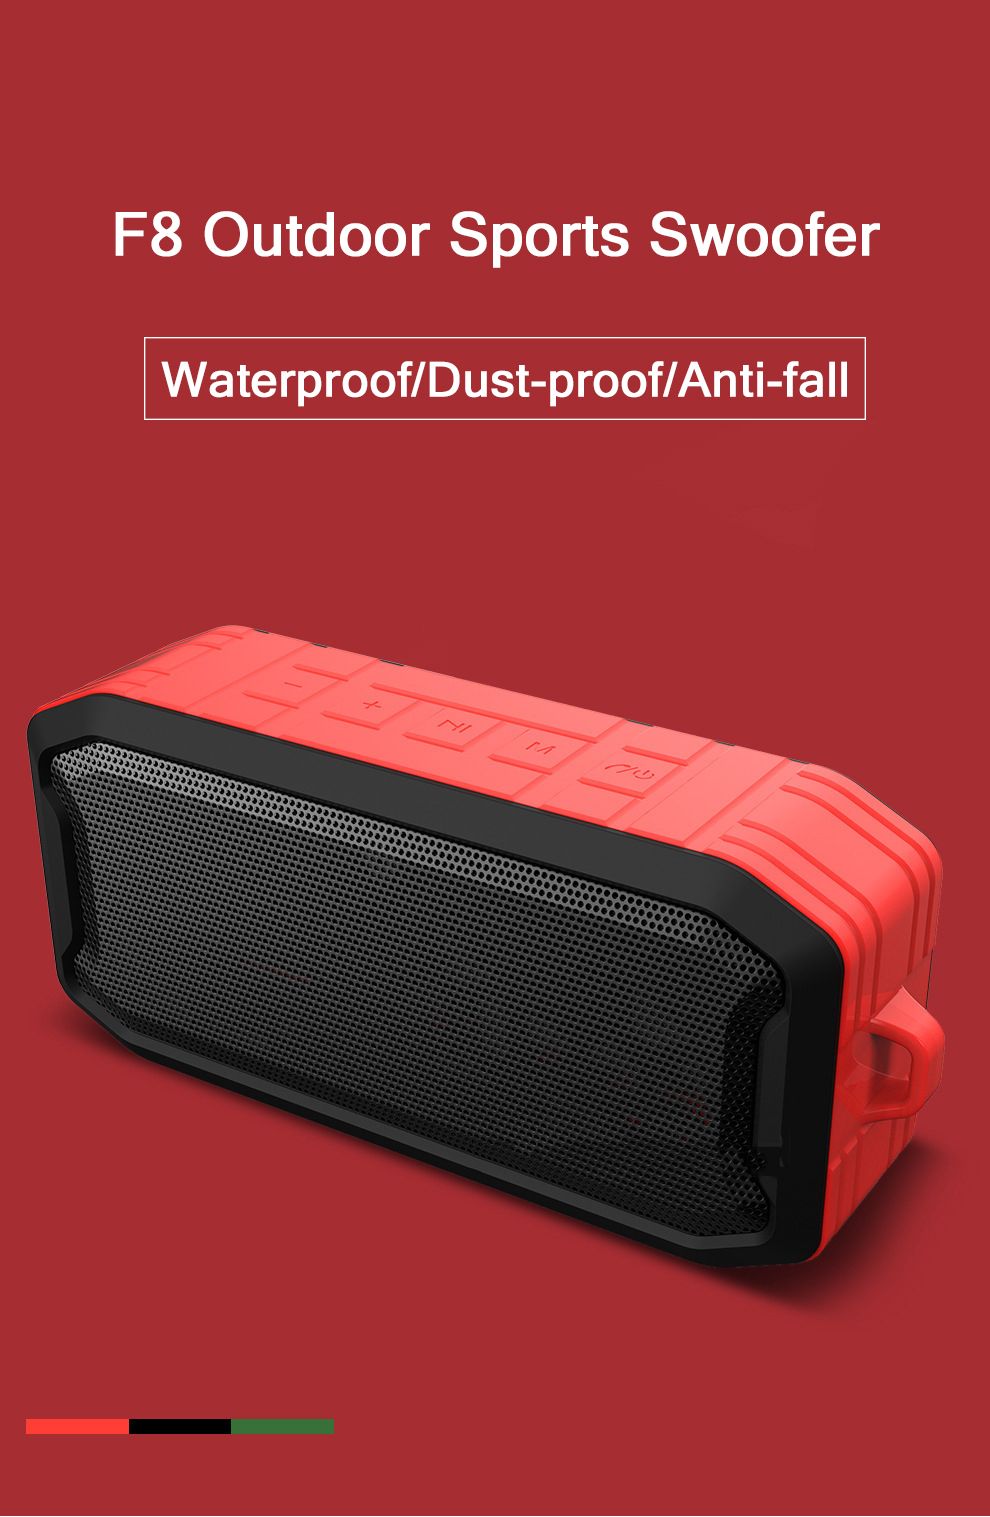 Bakeey-bluetooth-50-Waterproof-Speaker-with-USB-Flash-Drive-TF-Card-Playback-Subwoofer-TWS-Wireless--1700682